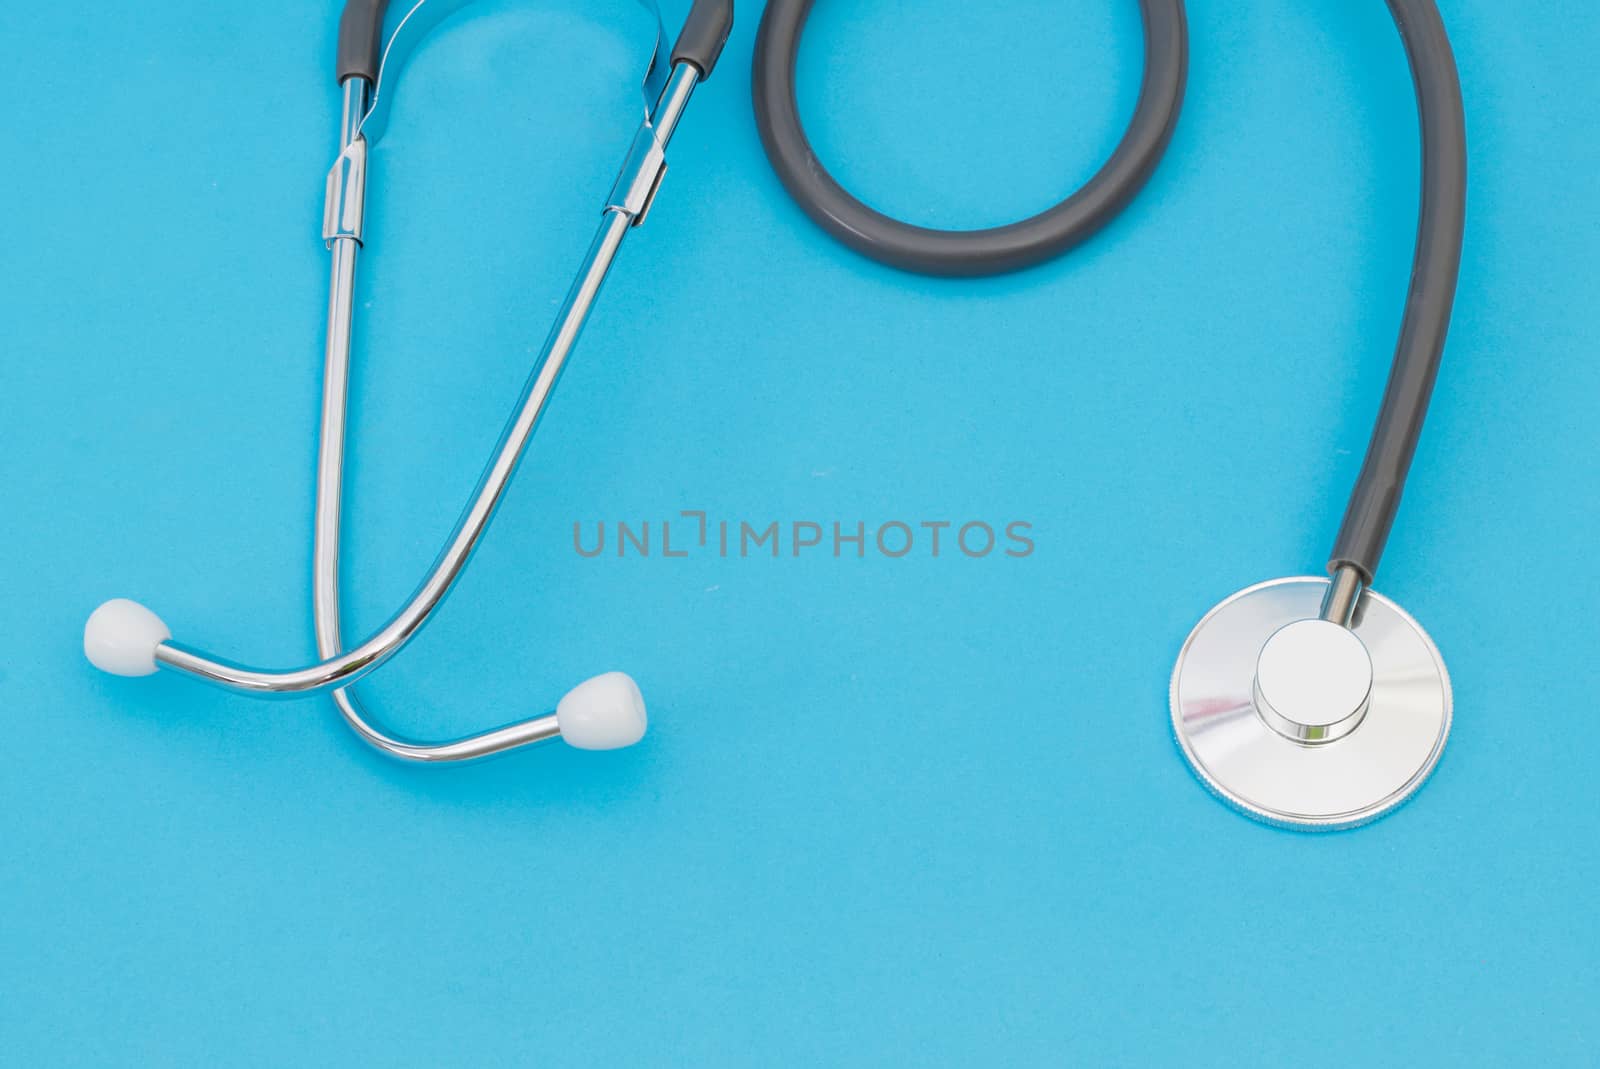 Medical stethoscope on a blue background